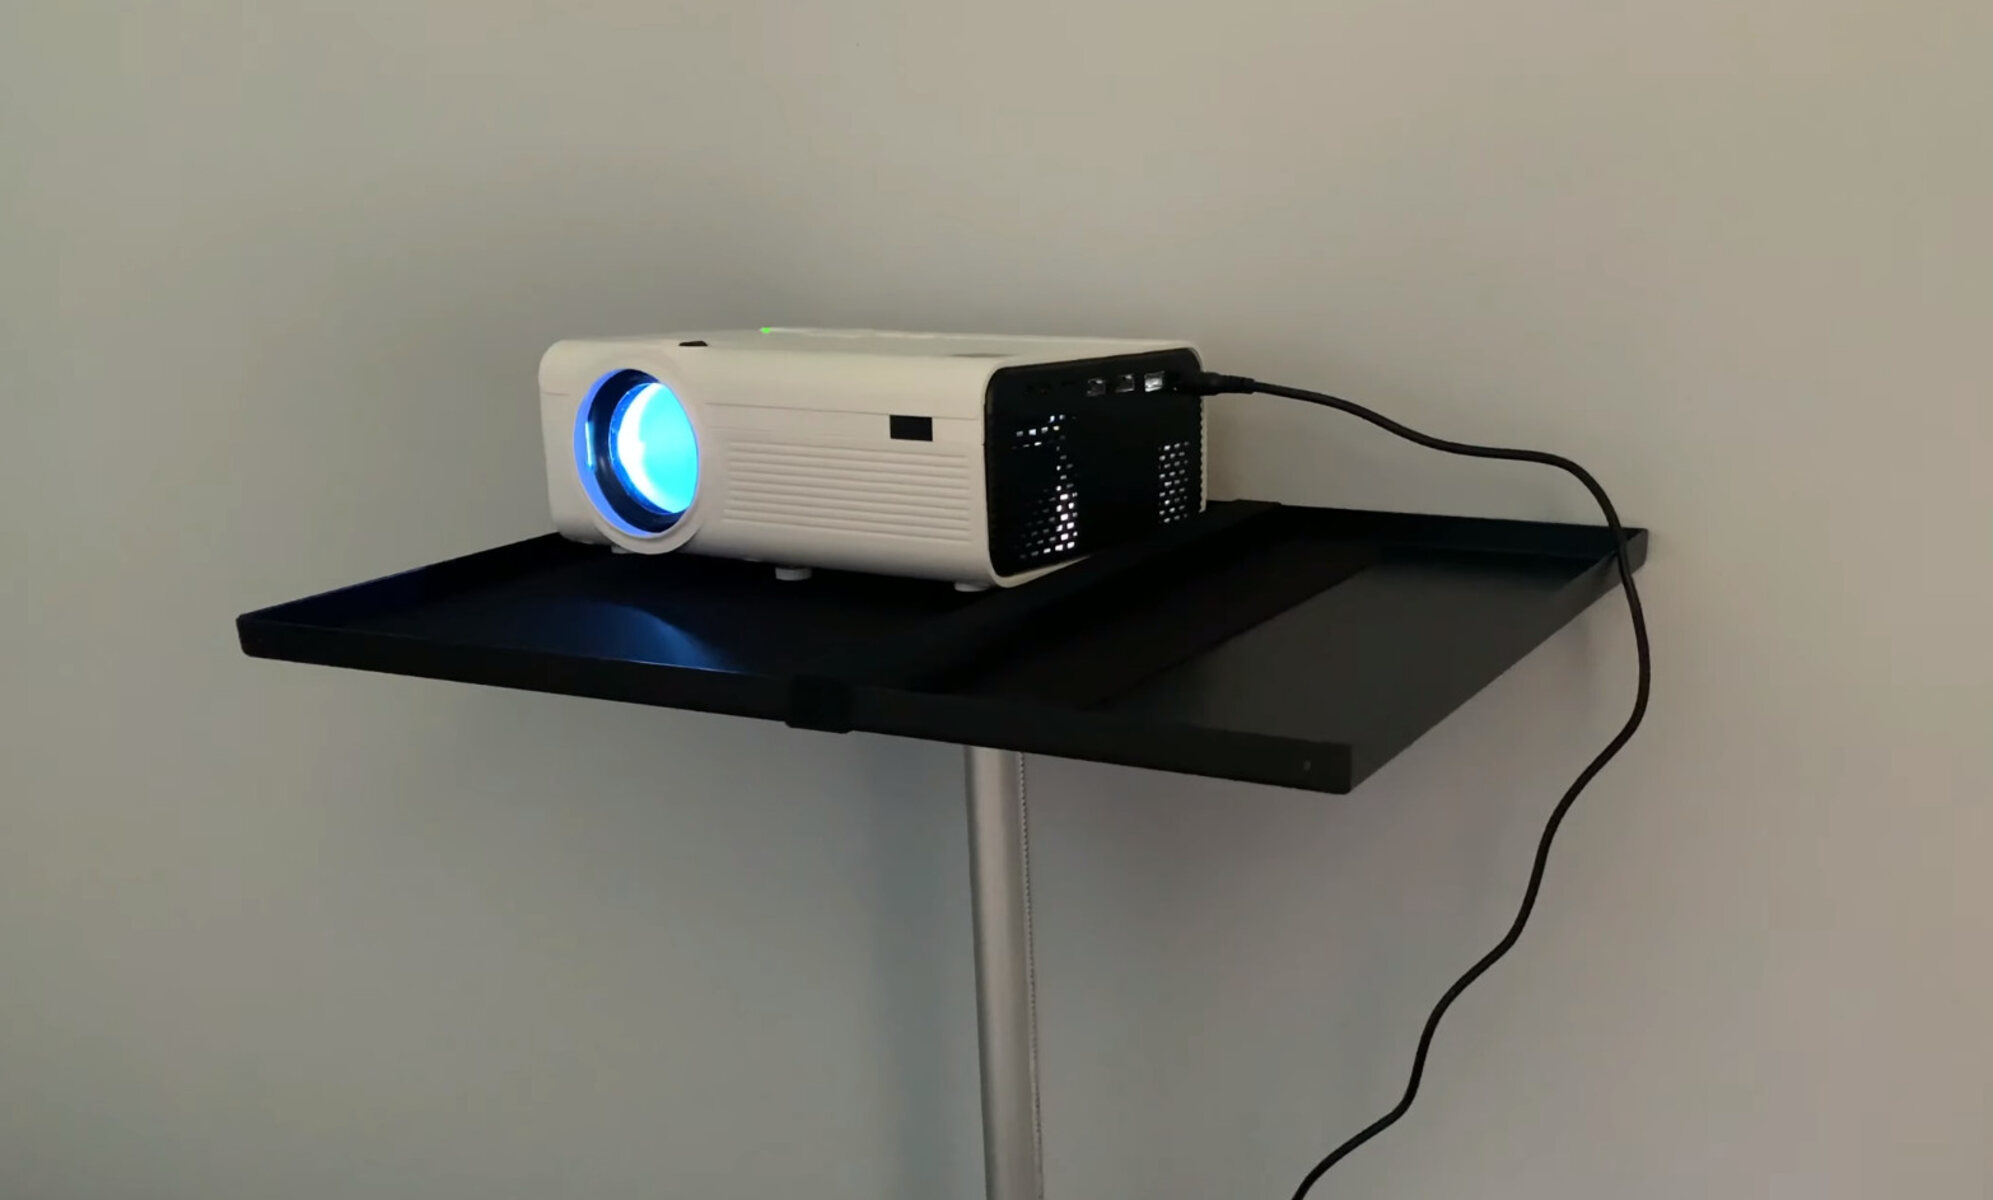 How To Use RCA Home Theater Projector With IPhone